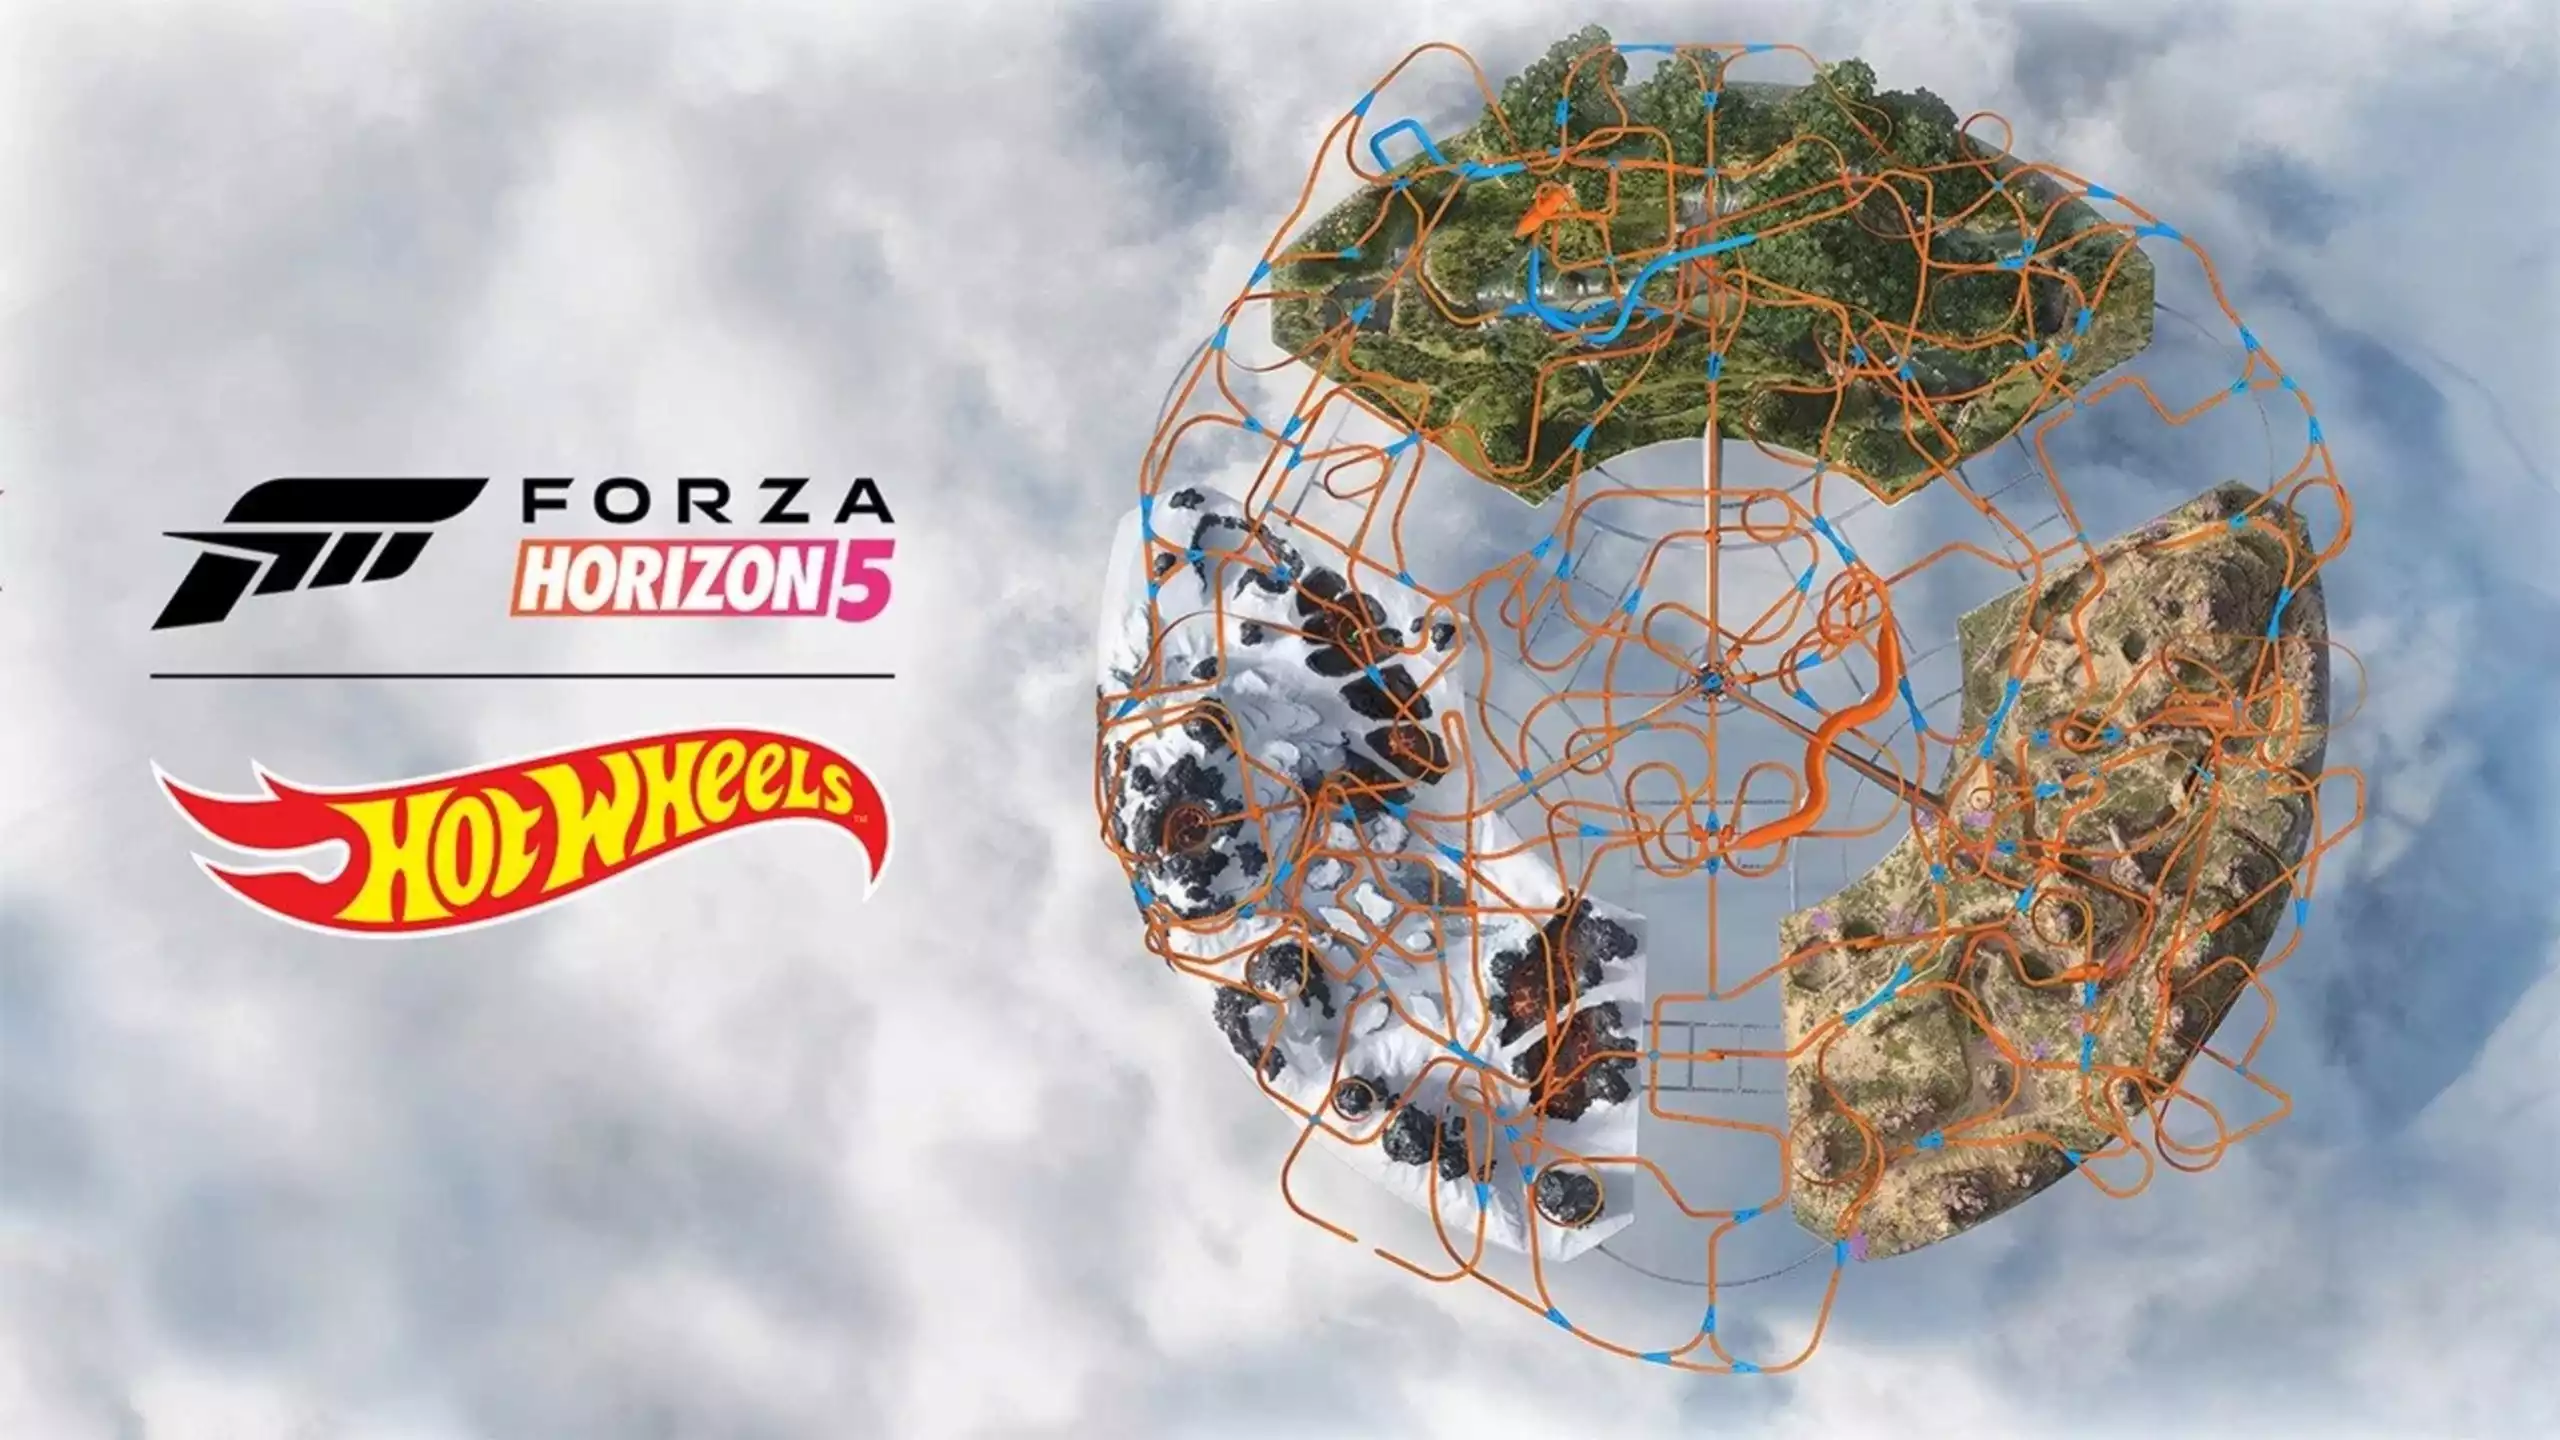 Forza Horizon 5 Hot Wheels Park Tour Mission: How To Complete